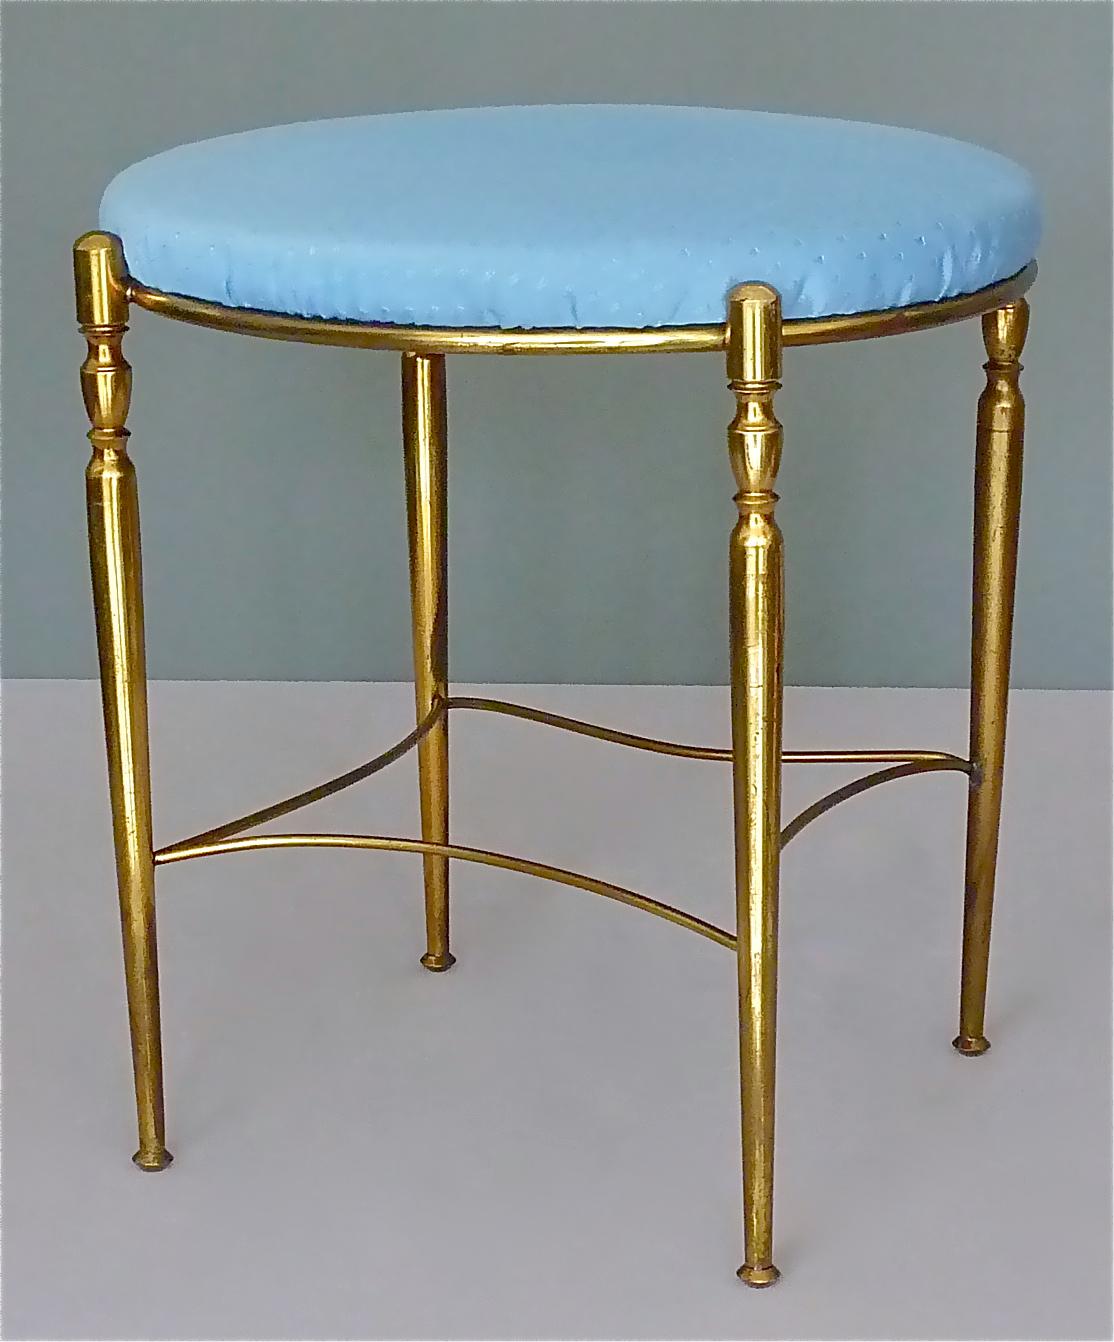 Elegant and rare french midcentury four-leg patinated brass stool or side chair by Maison Jansen, France around 1950s to 1960s. The neoclassical midcentury stool with blue fabric upholstery, comparable to Maison Bagues stays in very good original